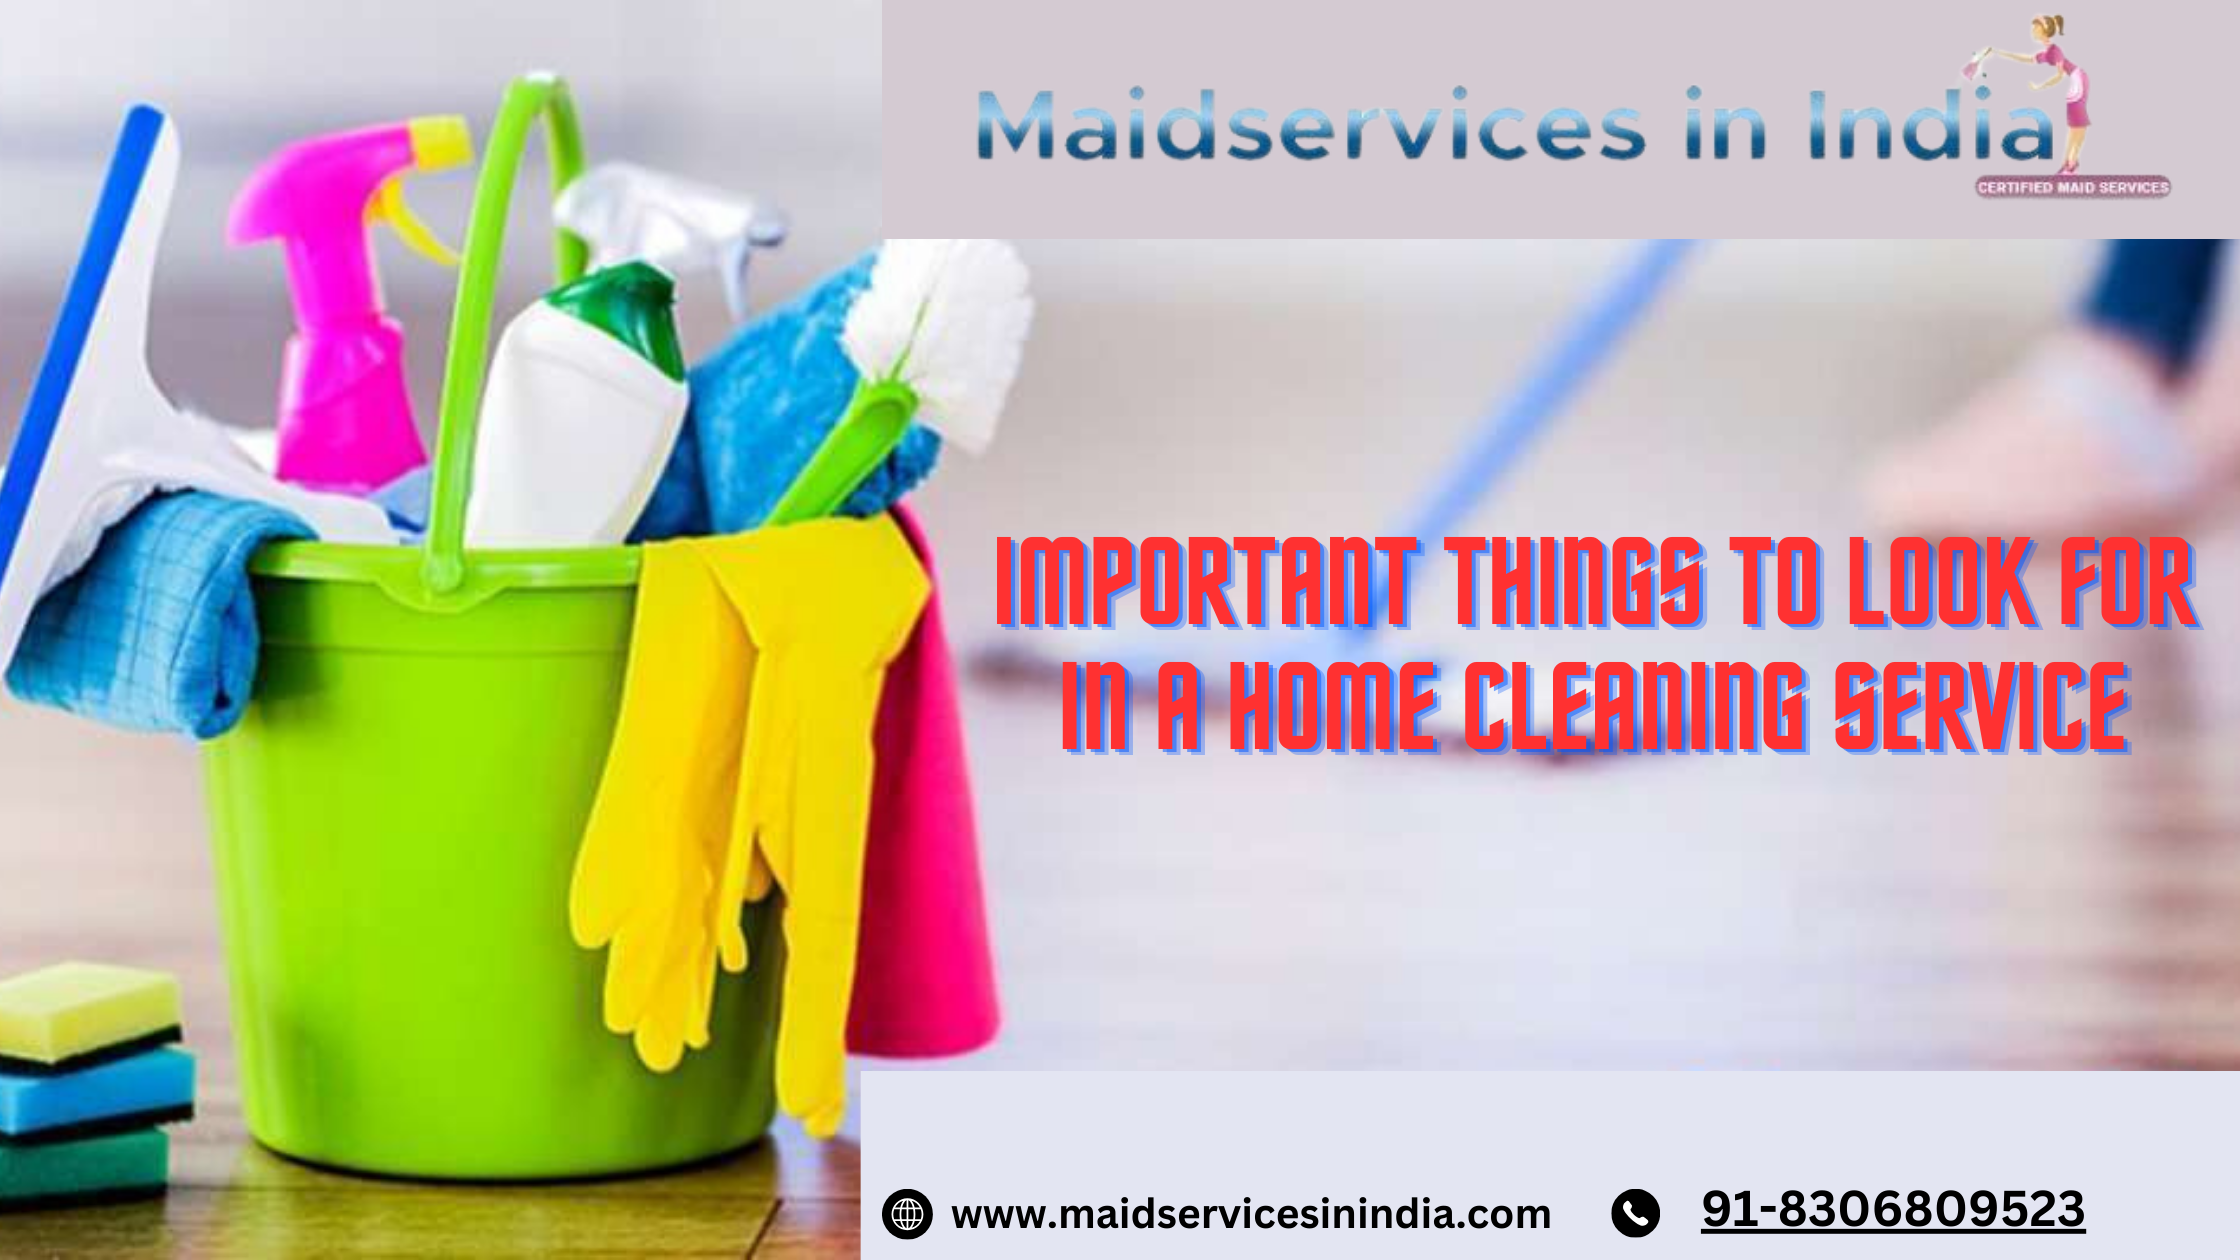 A home cleaning service offers professional cleaning of residences, handling tasks like vacuuming, mopping, dusting, and sanitizing.